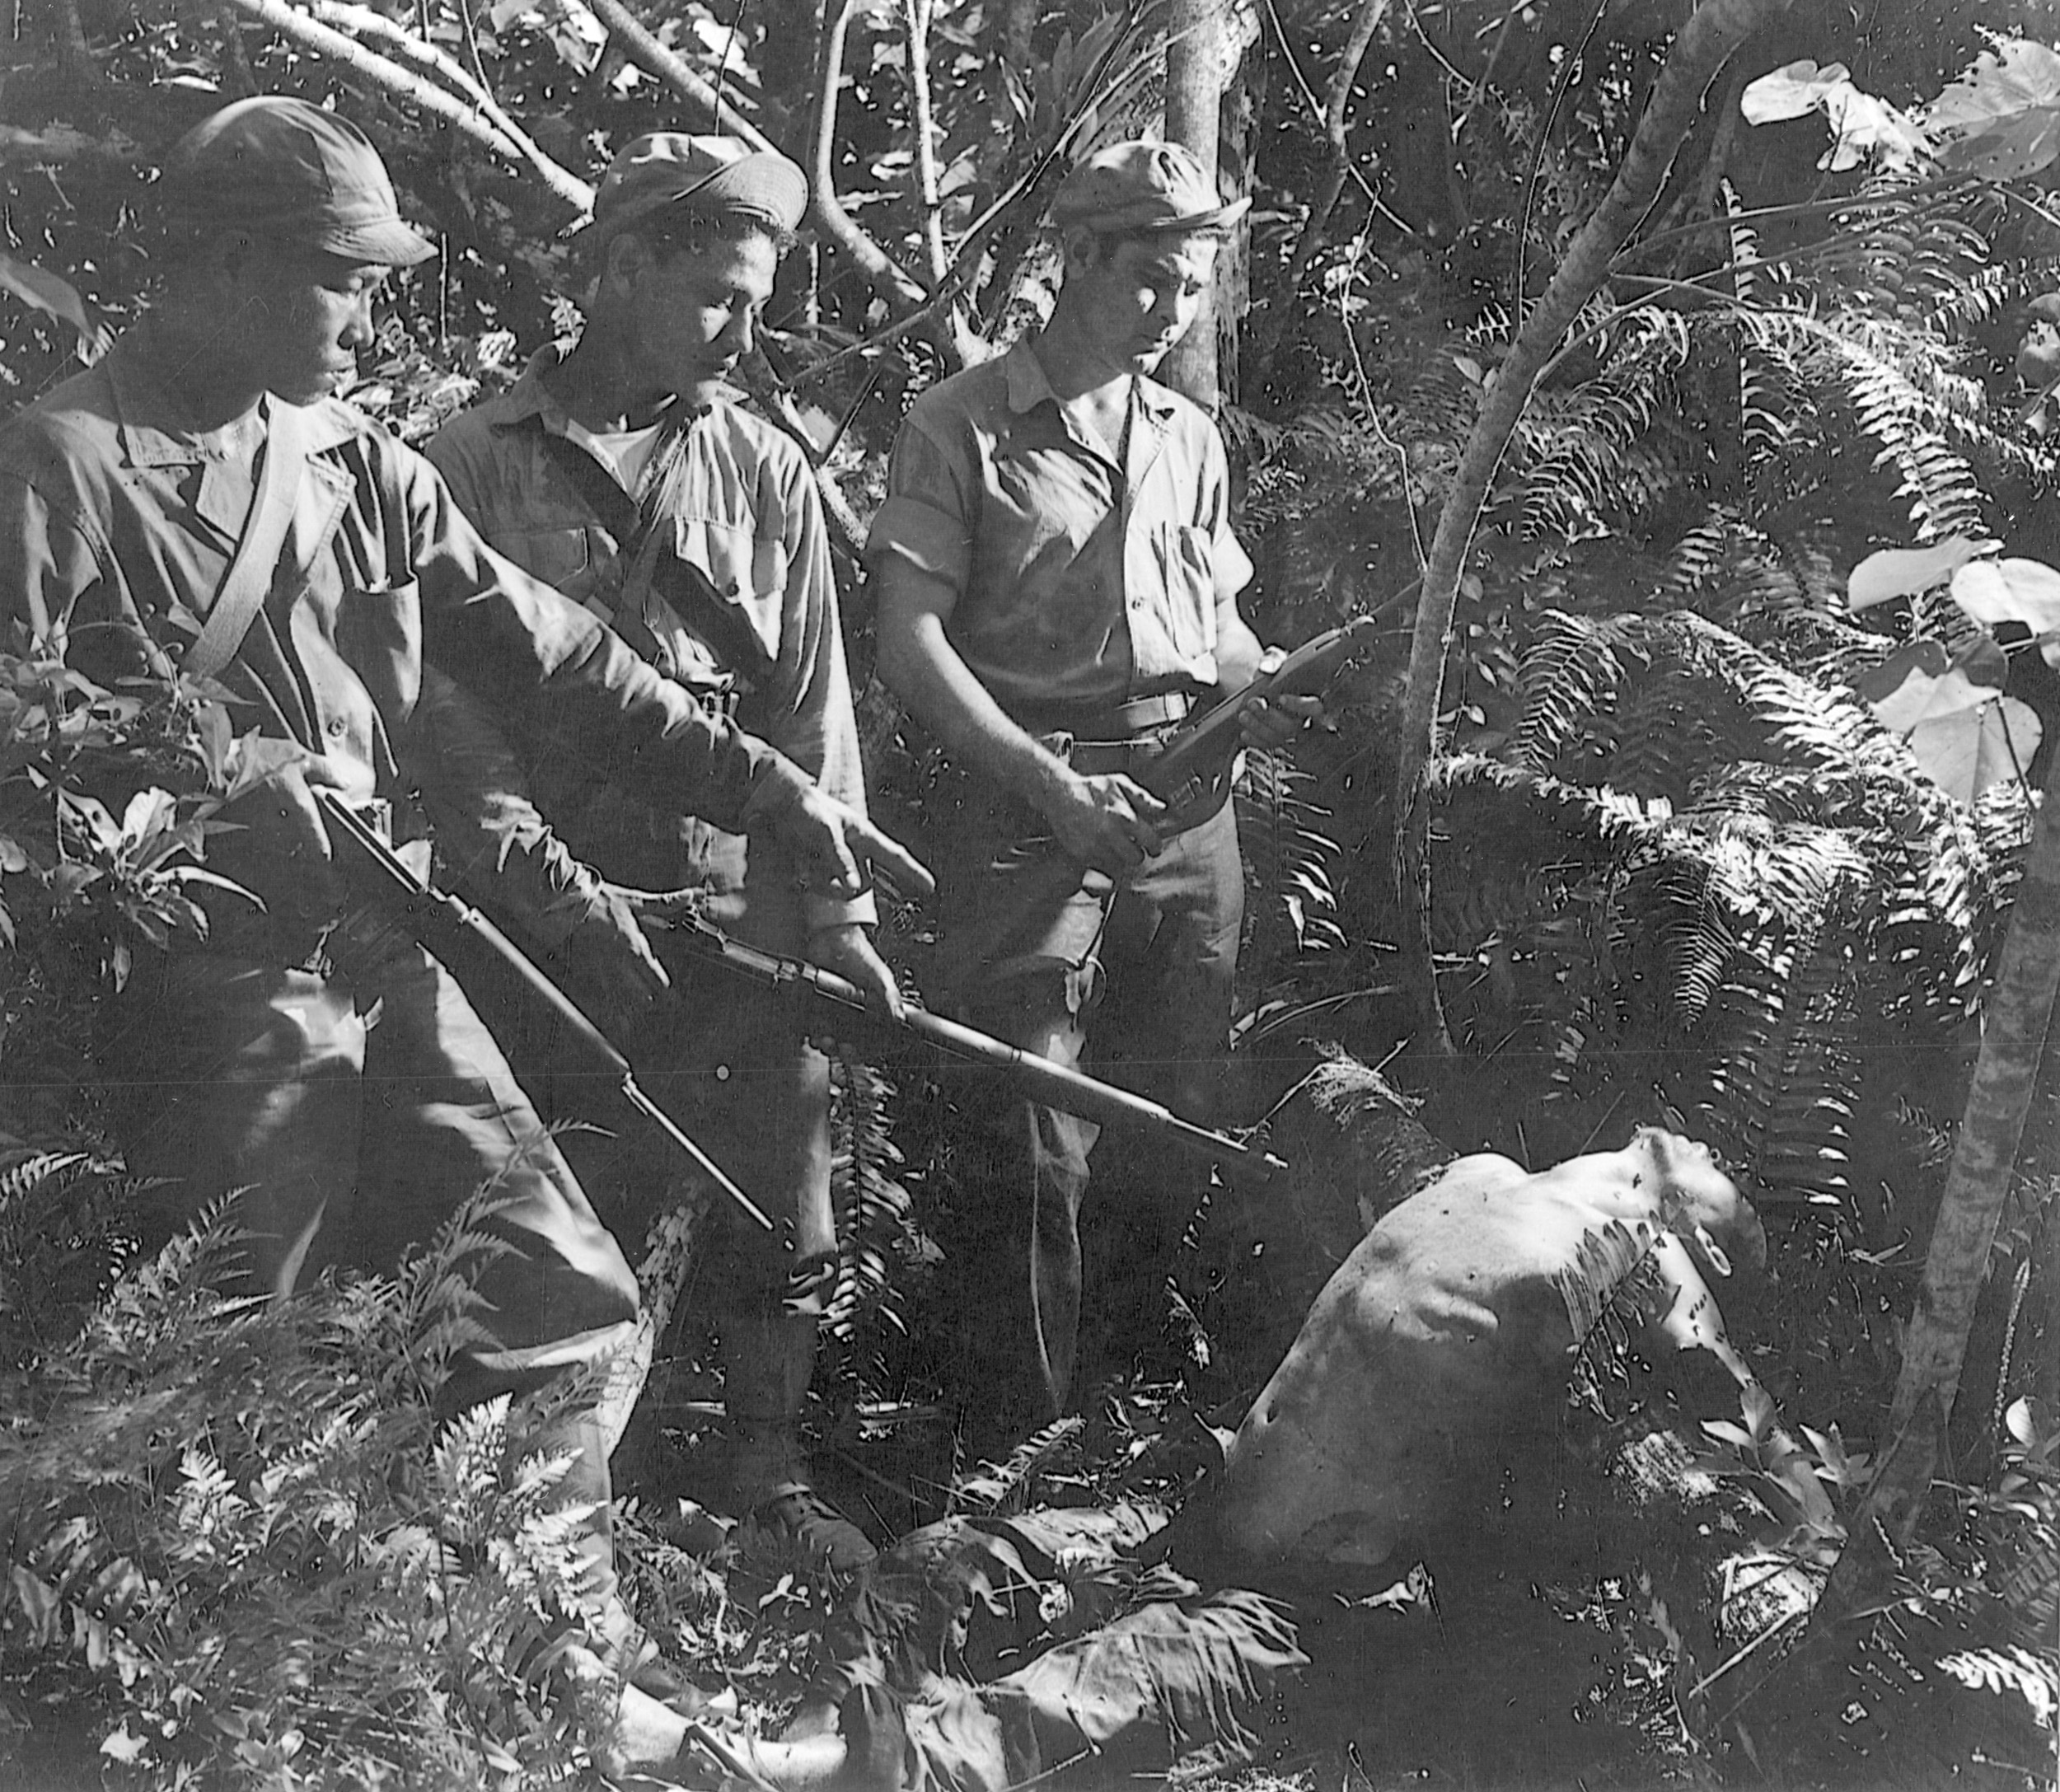 With their guns at the ready, members of a native military patrol stand over the body of a dead Japanese soldier on Guam in the Marianas.